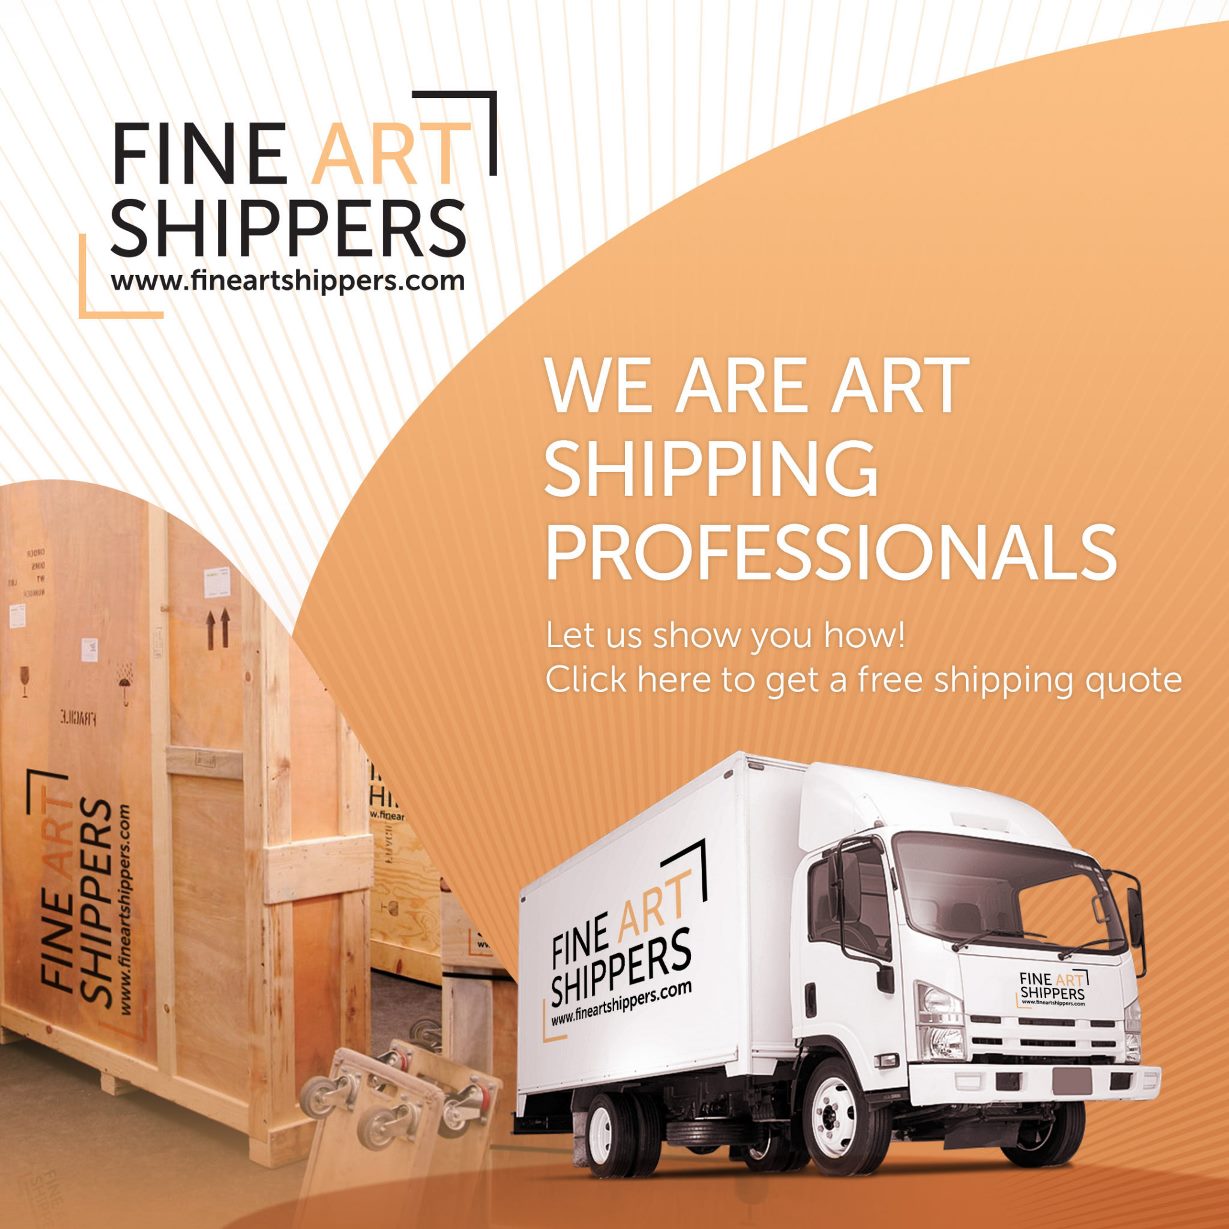 Fine Art Shippers Who We Are and What We Do